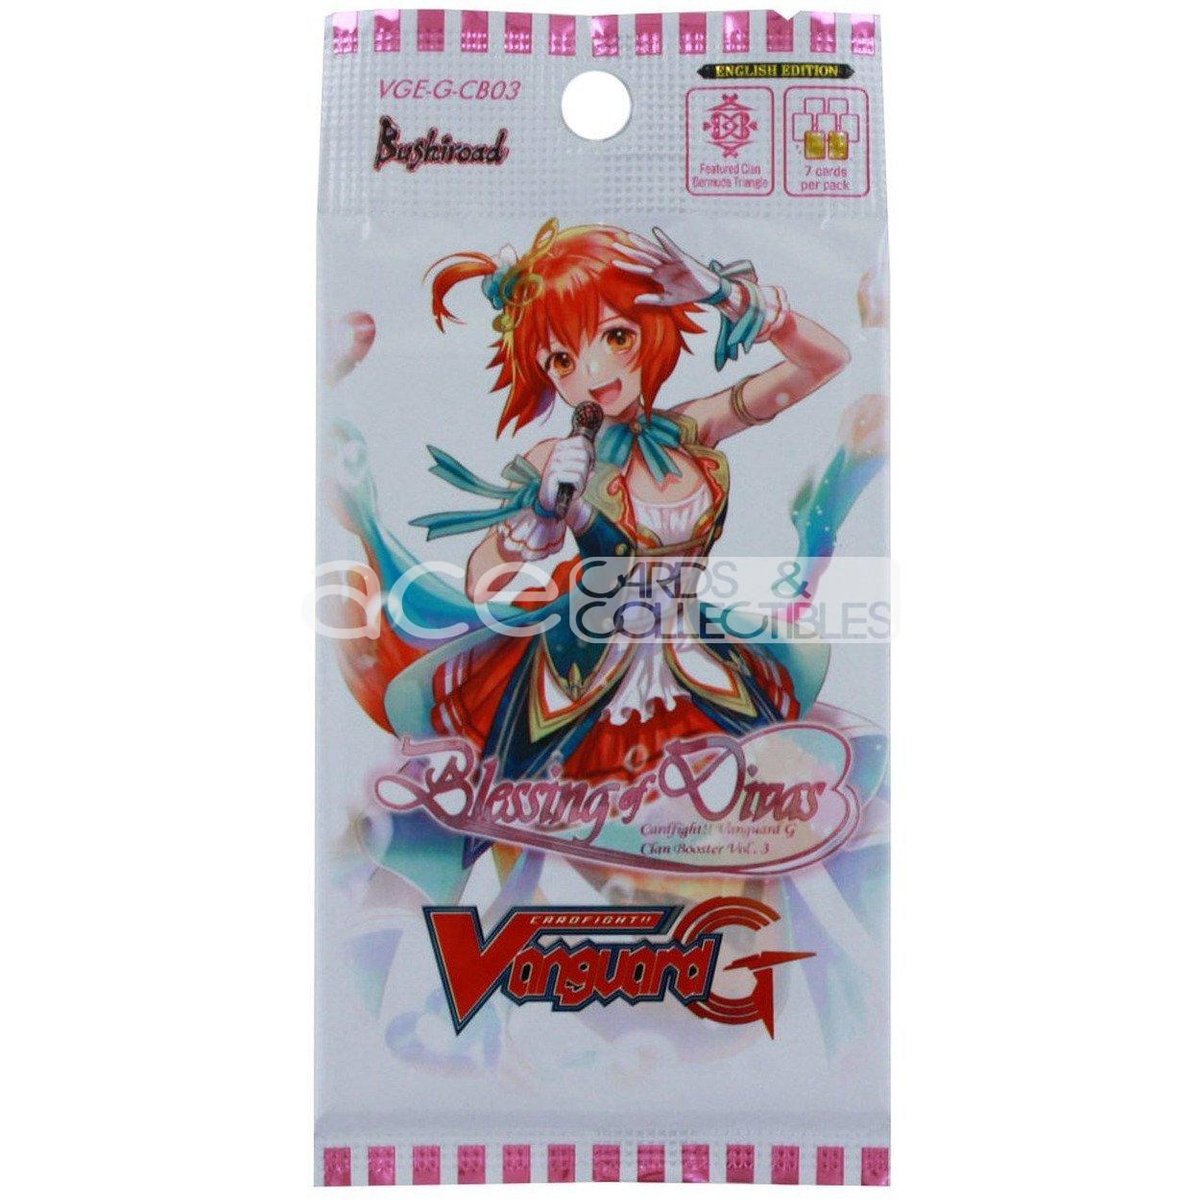 Cardfight Vanguard G Blessing of Divas [VGE-G-CB03] (English)-Single Pack (Random)-Bushiroad-Ace Cards &amp; Collectibles